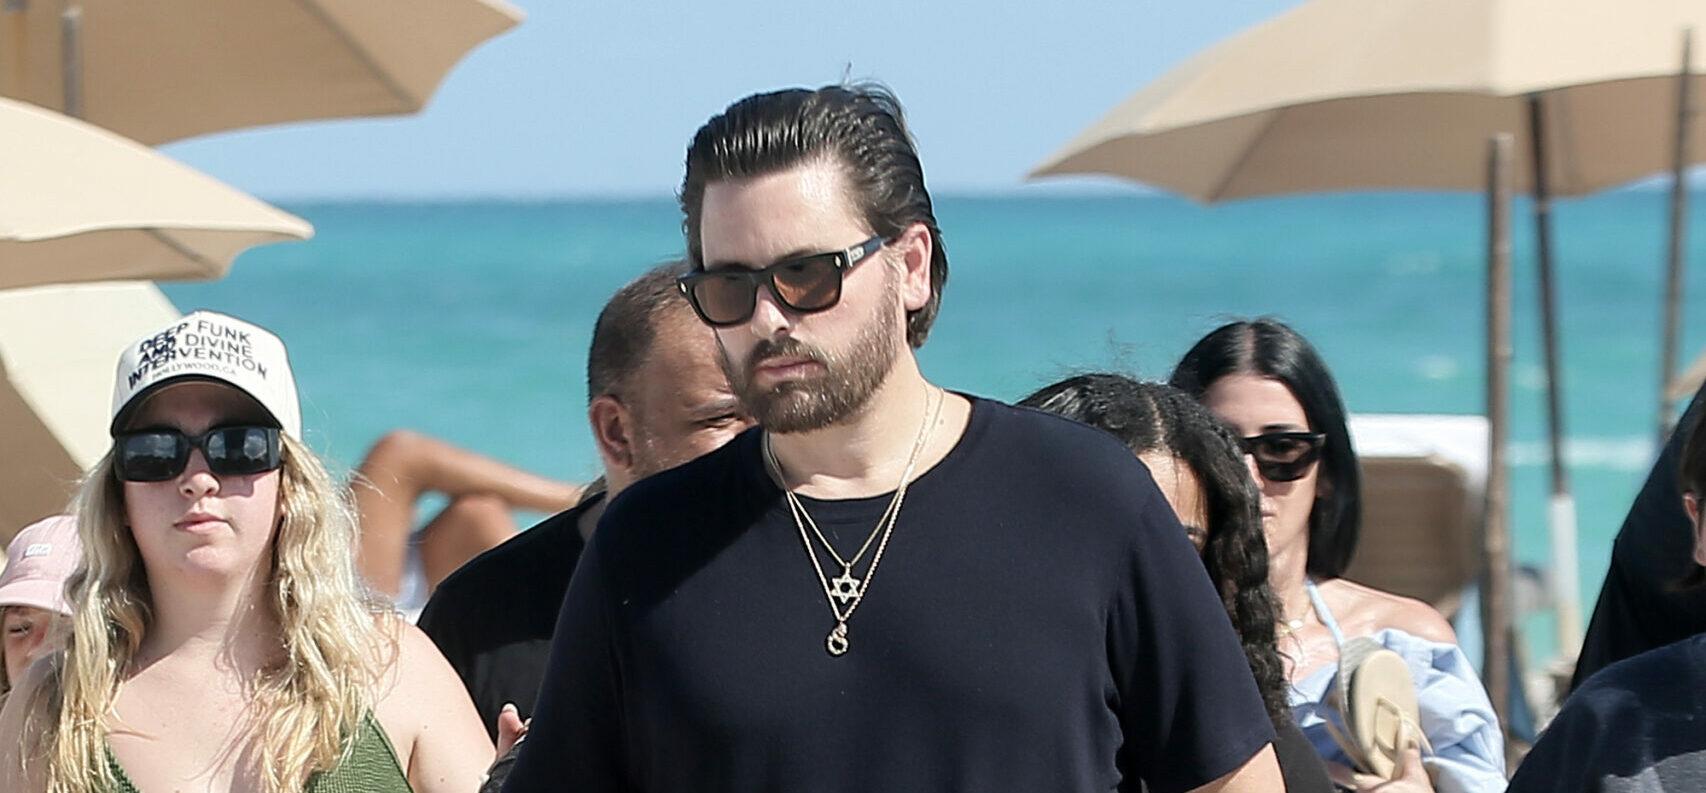 Scott Disick looks relaxed as he spends time with his 3 children on the beach in Miami